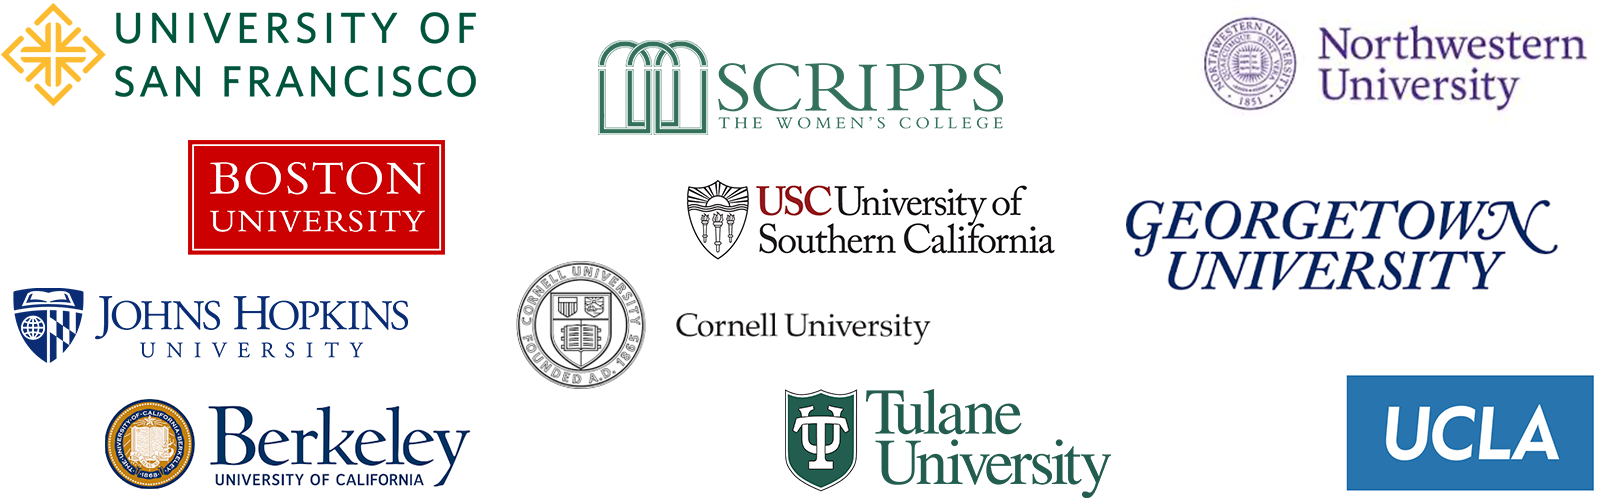 A number of University logos in a single image: USF, UCLA, UC Berkeley, Georgetown, Boston College, and more